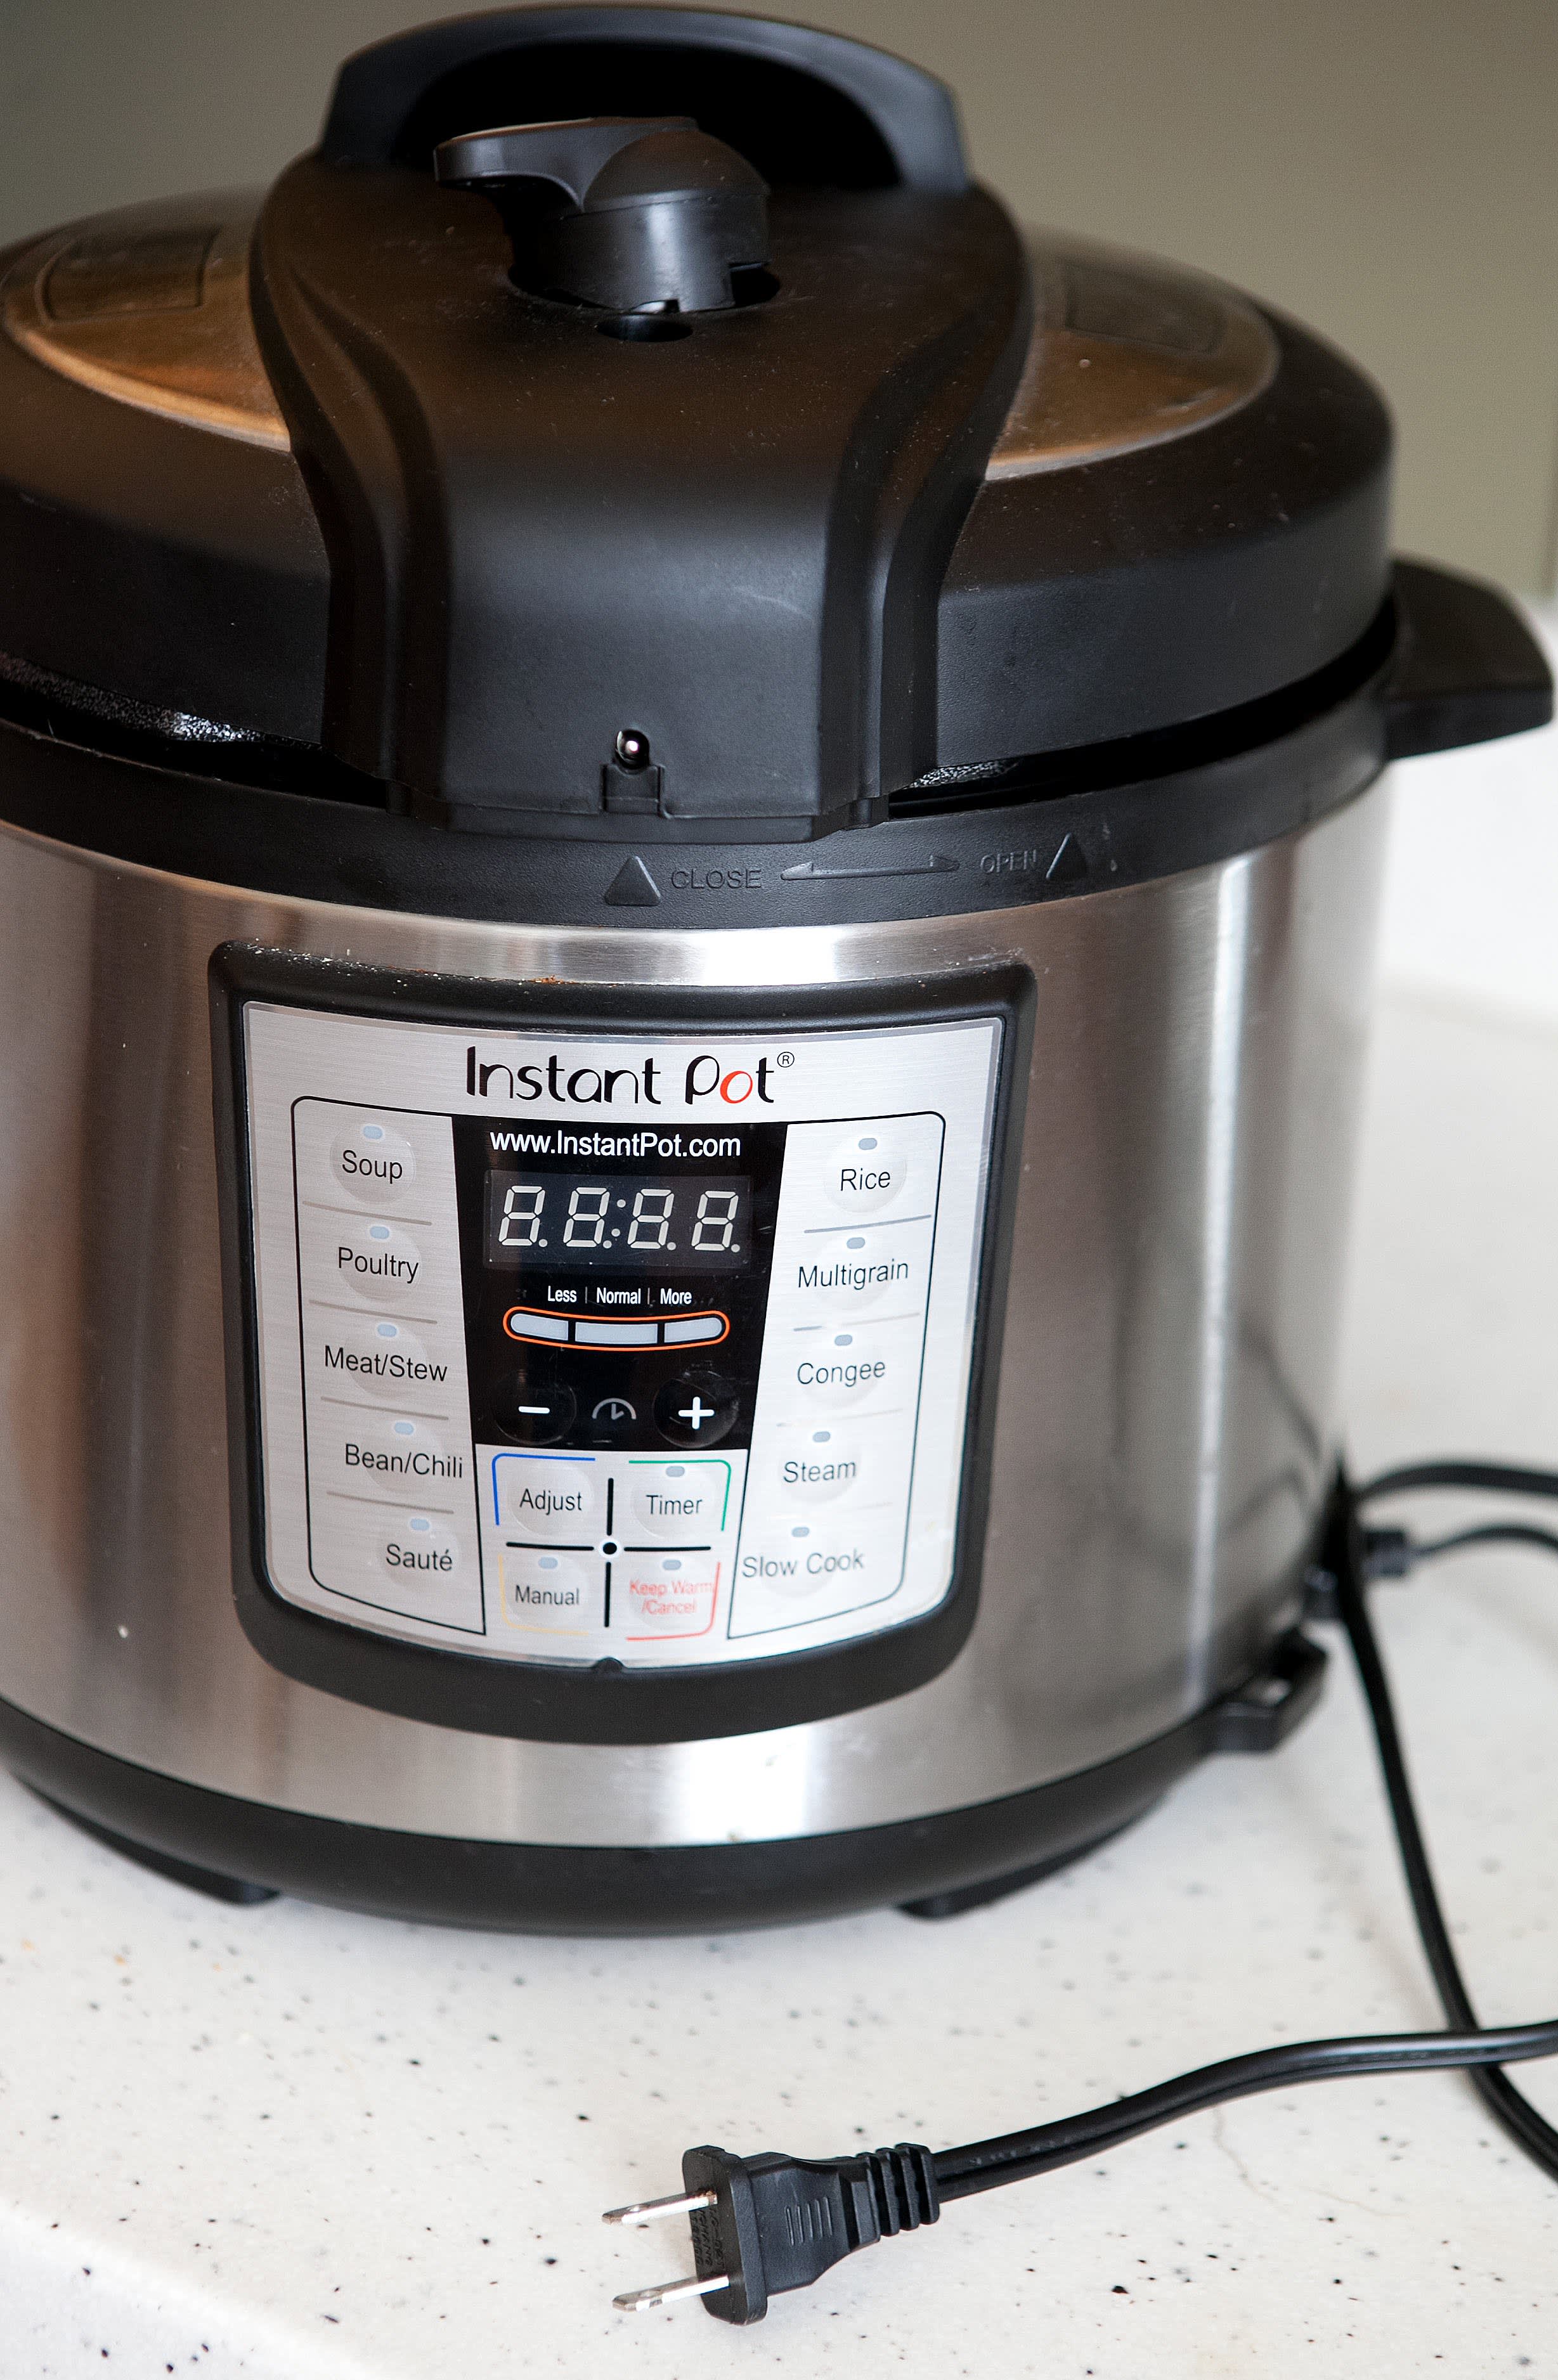 How to clean an Instant Pot: Best care and cleaning tips for your